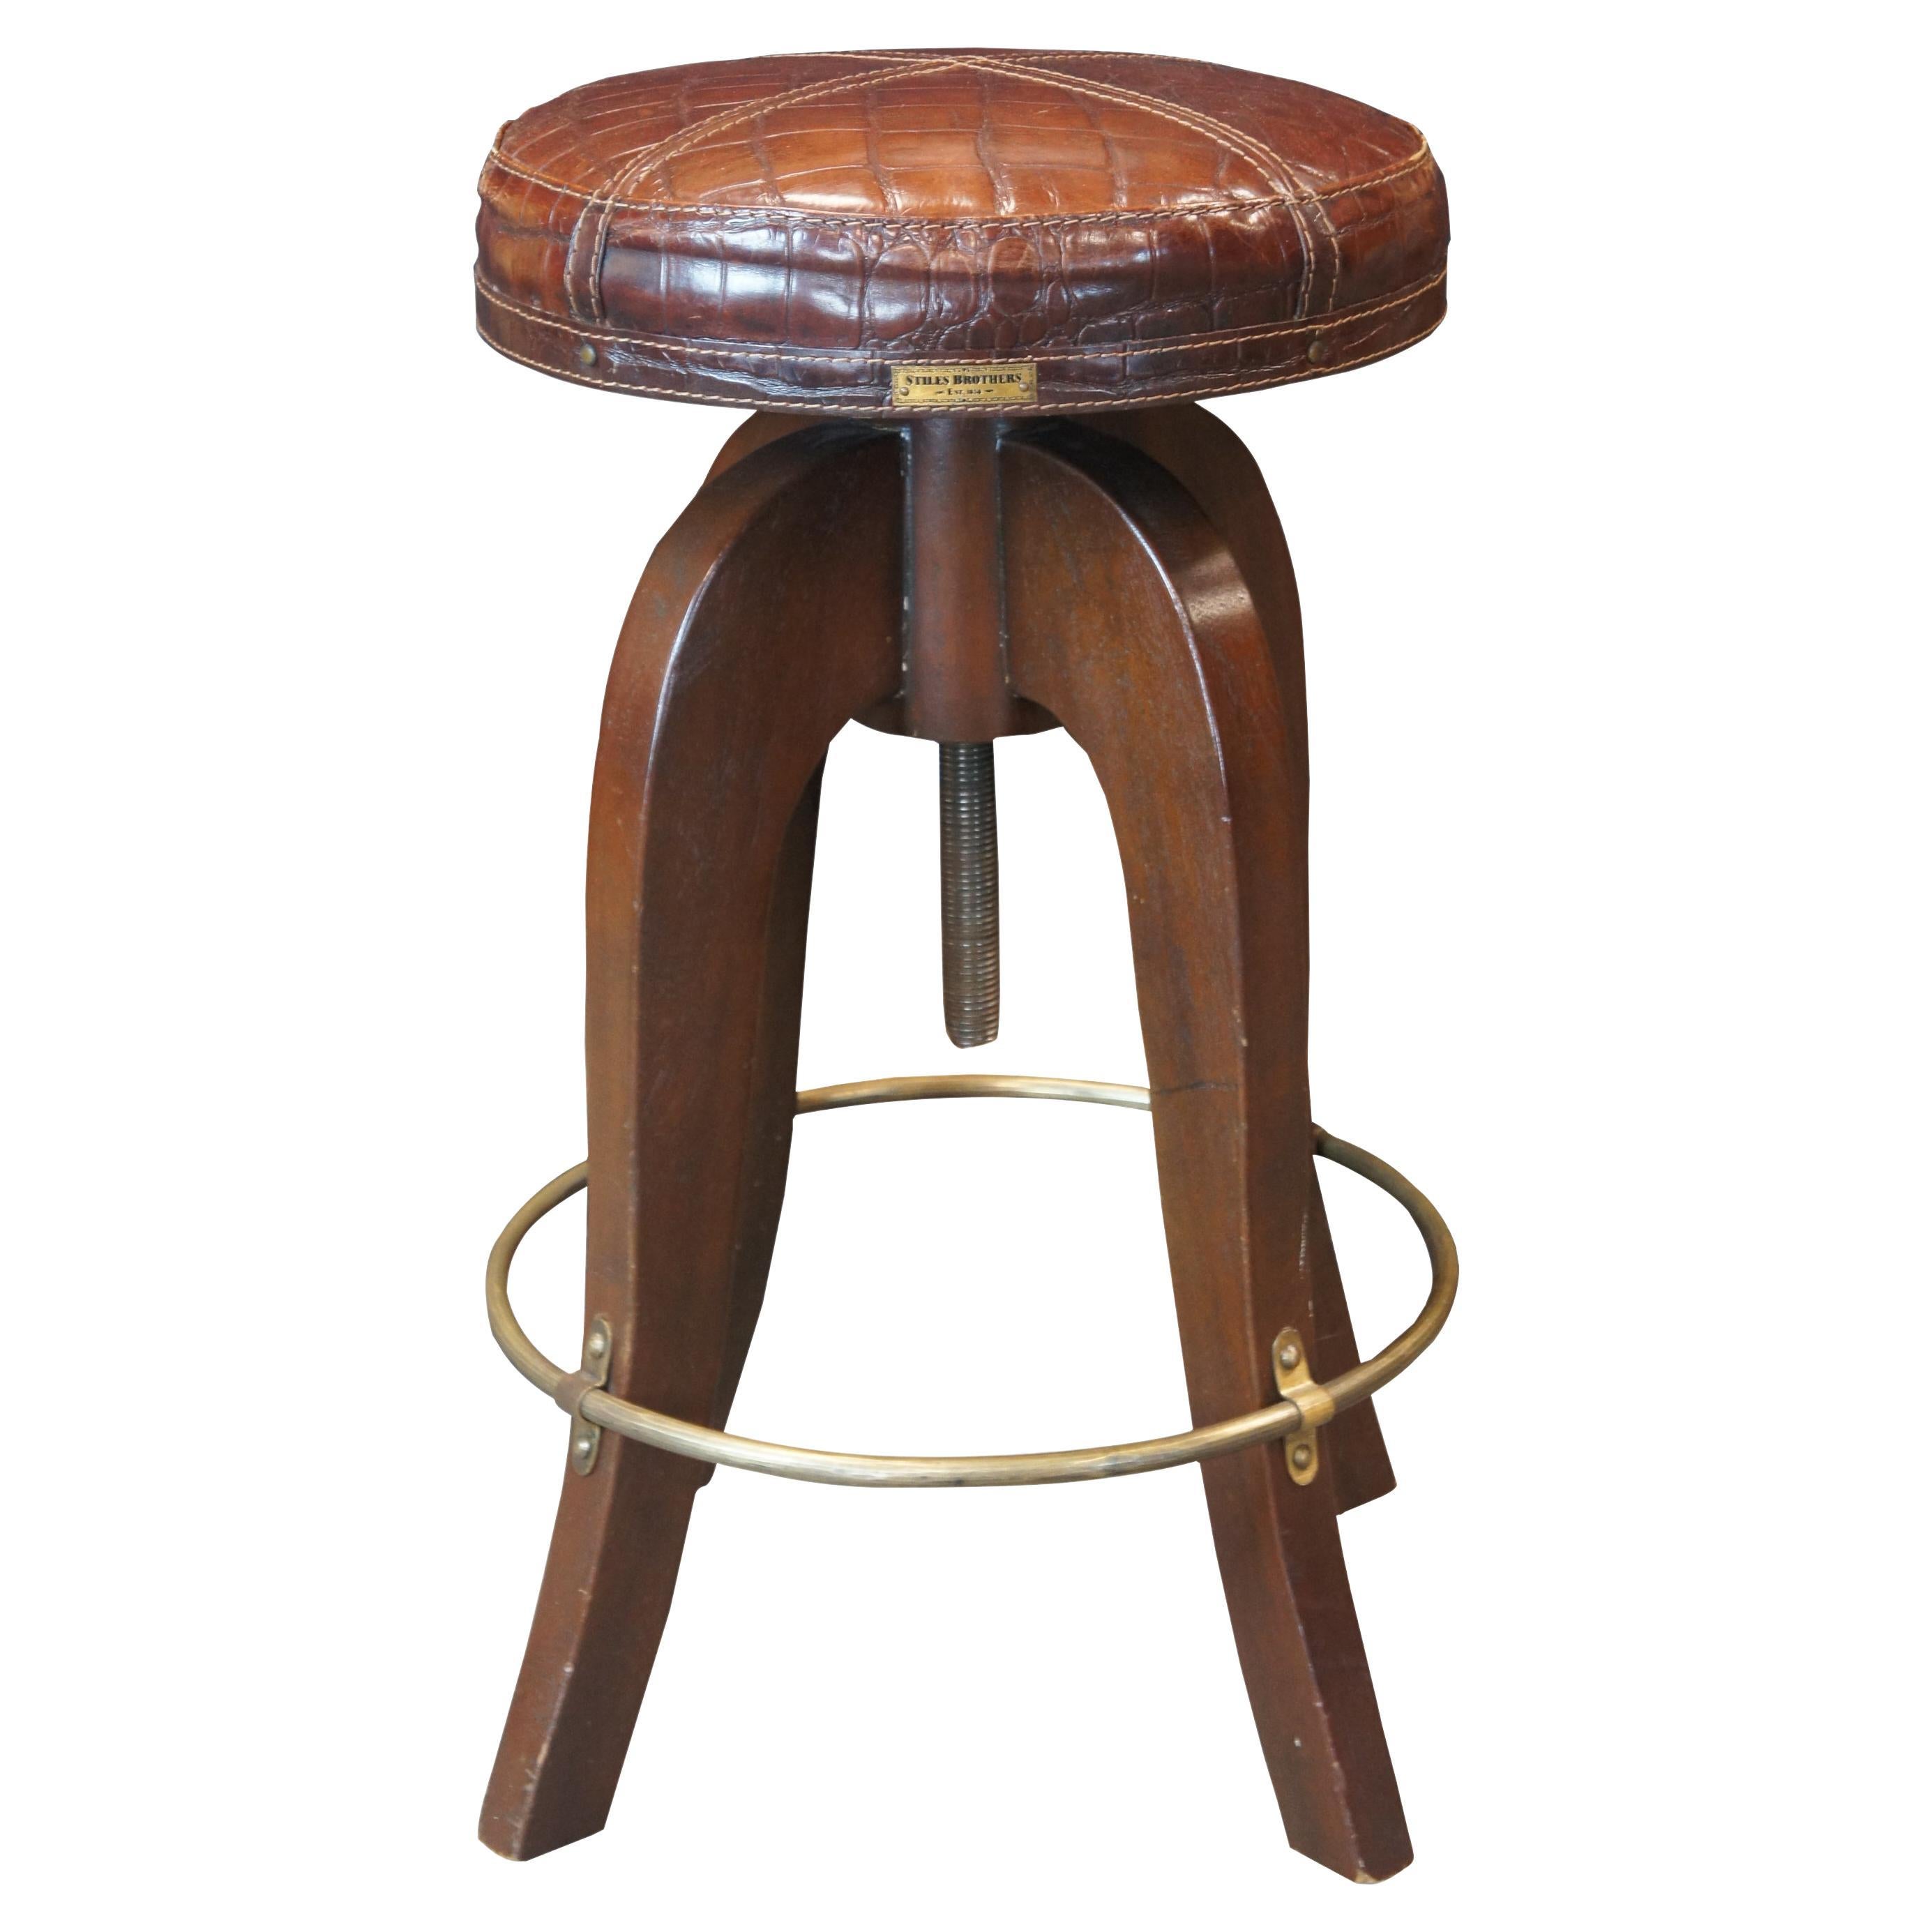 Bauer Int'l Stiles Brothers Adjustable Crocadile Leather Counter Bar Stool